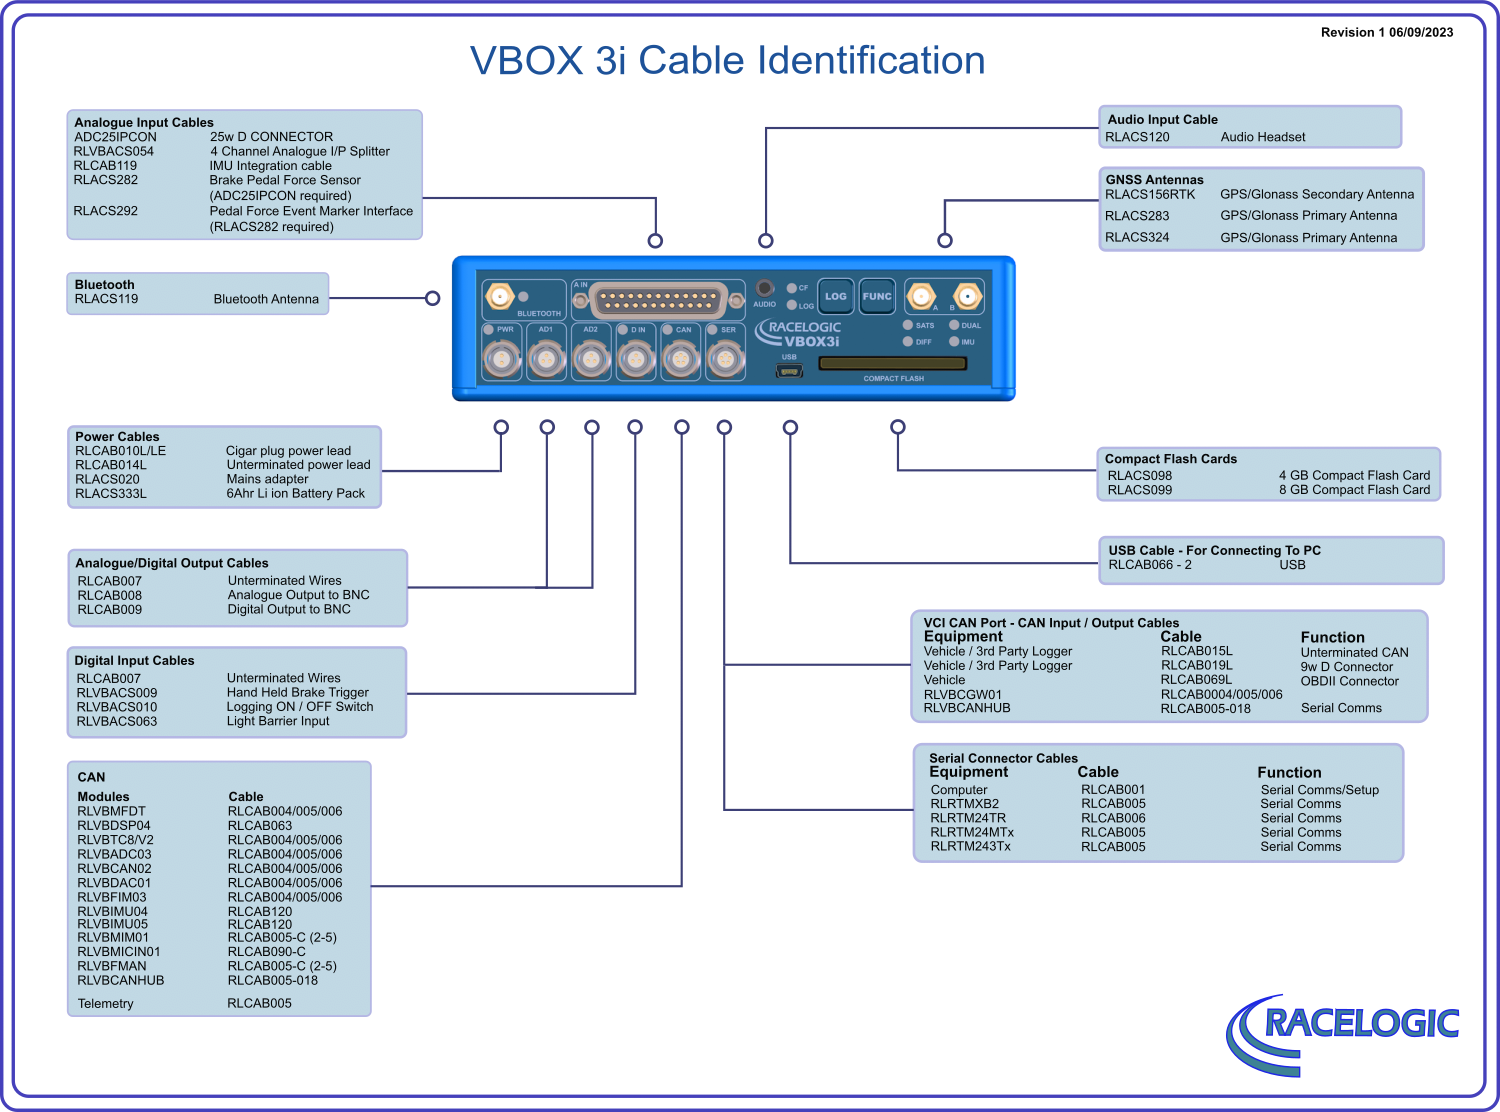 VBOX 3i Cable identification diagram.png